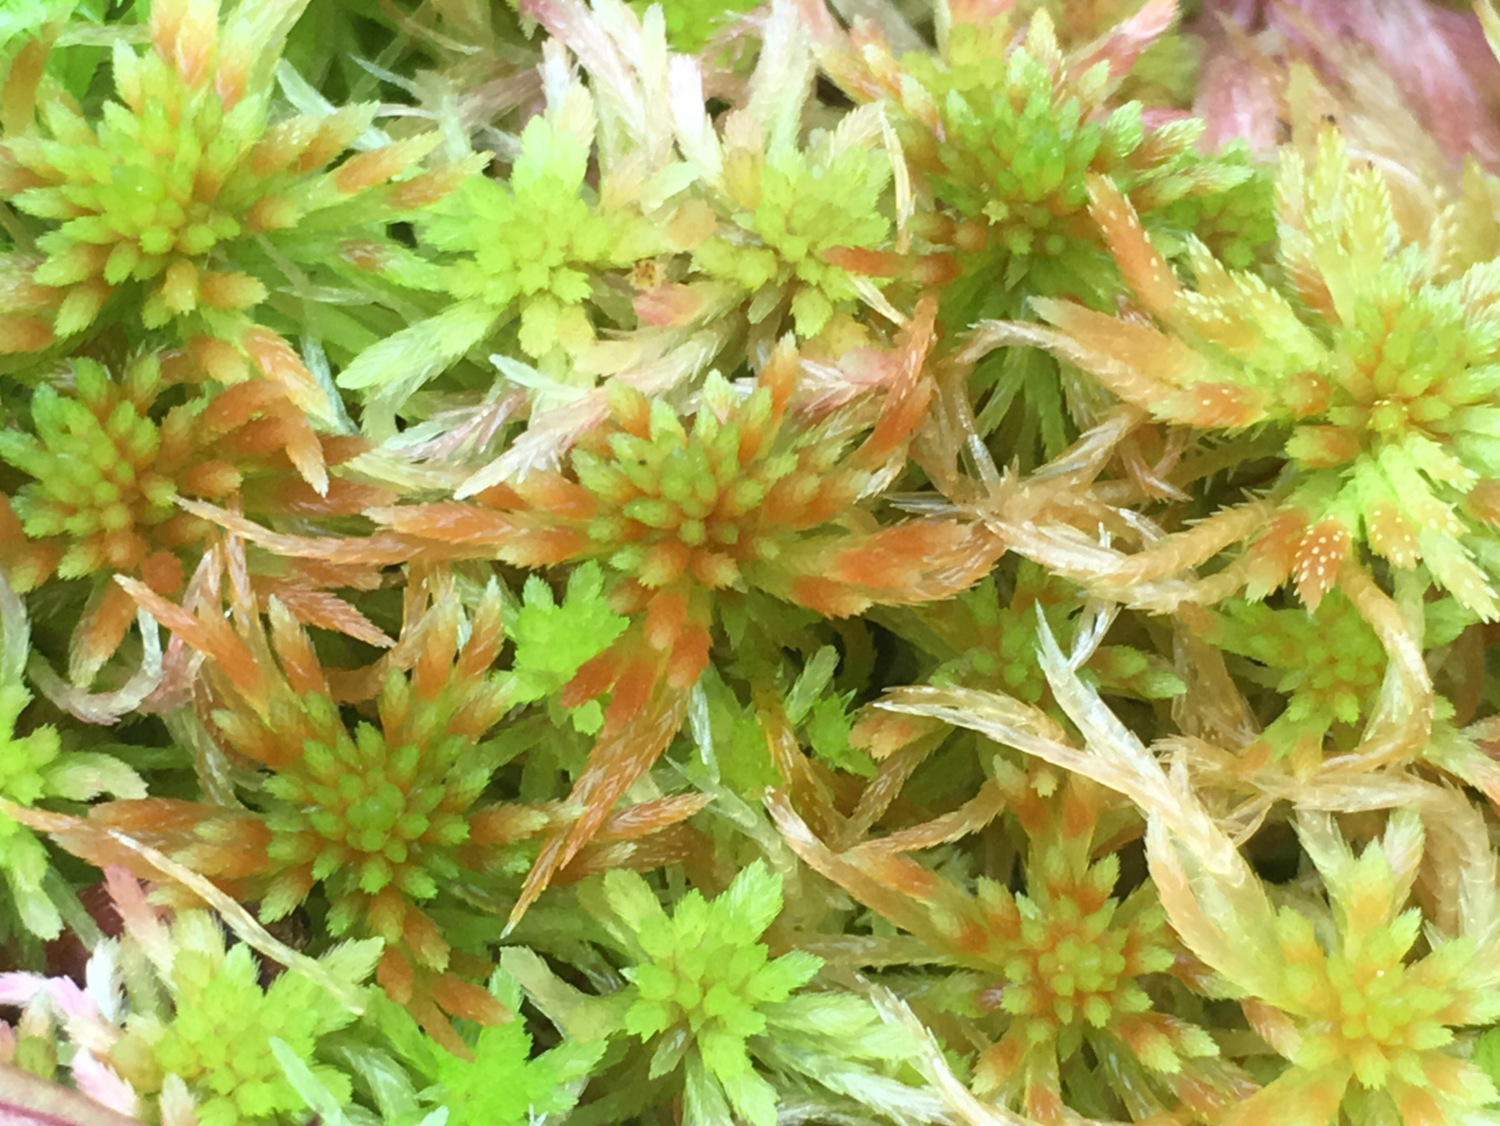 Live Green Sphagnum Moss for sale Canada